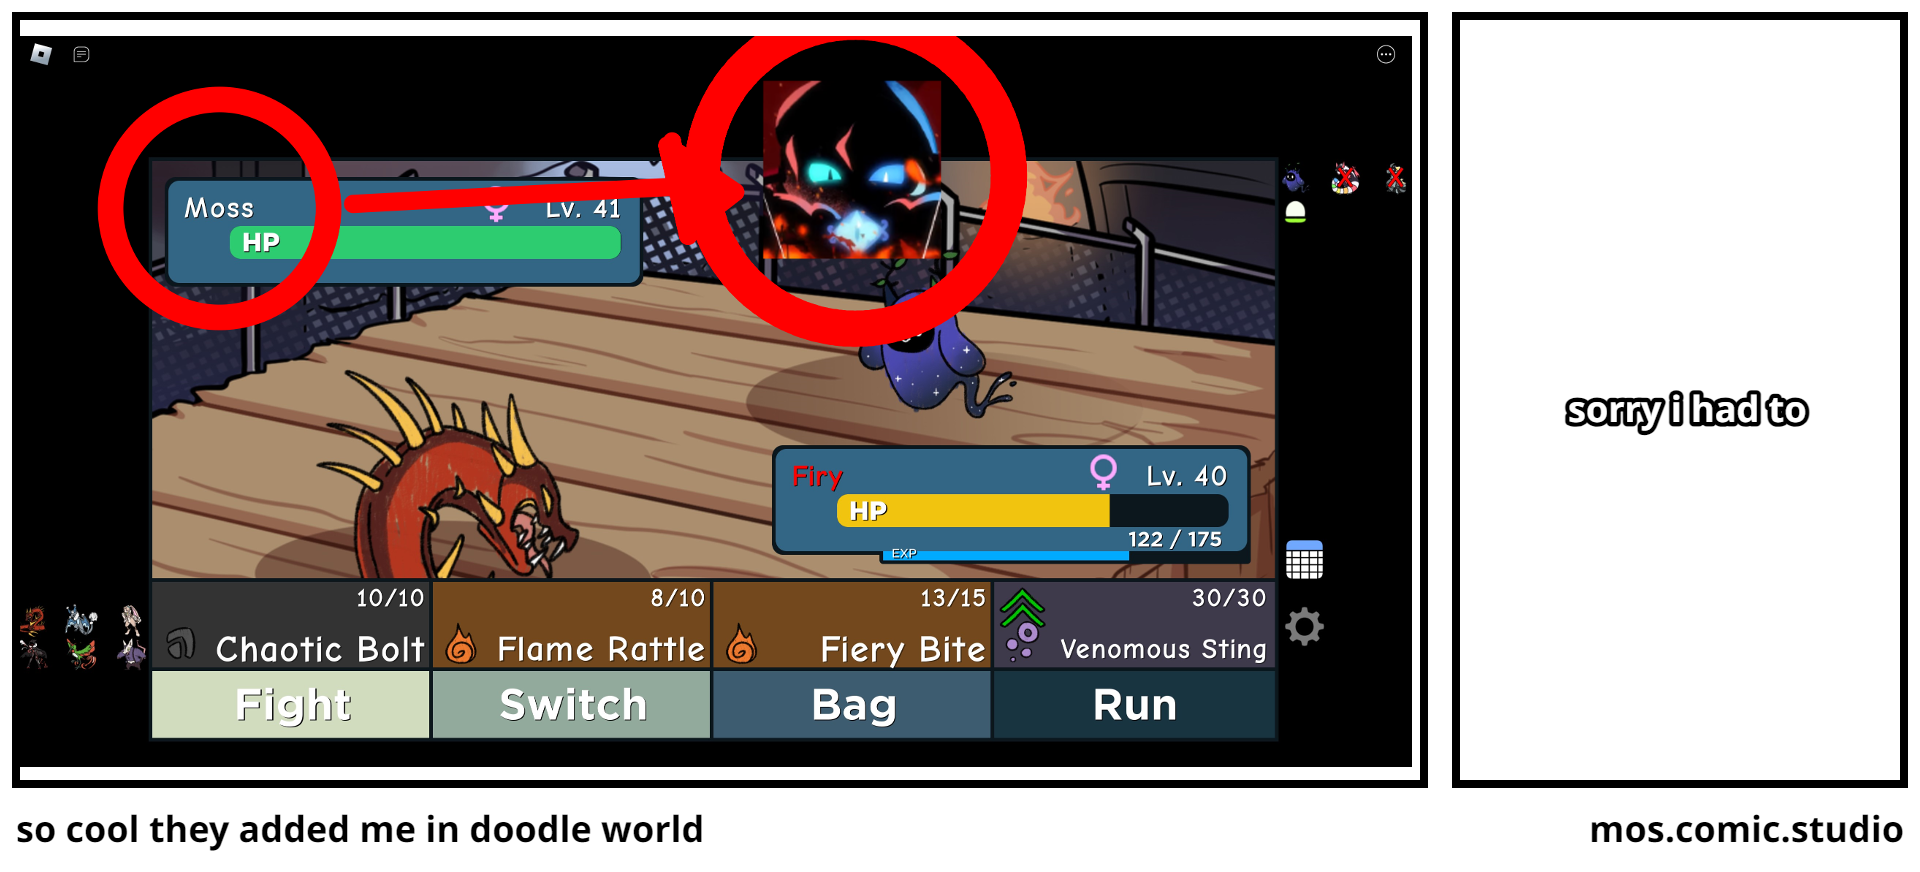 so cool they added me in doodle world